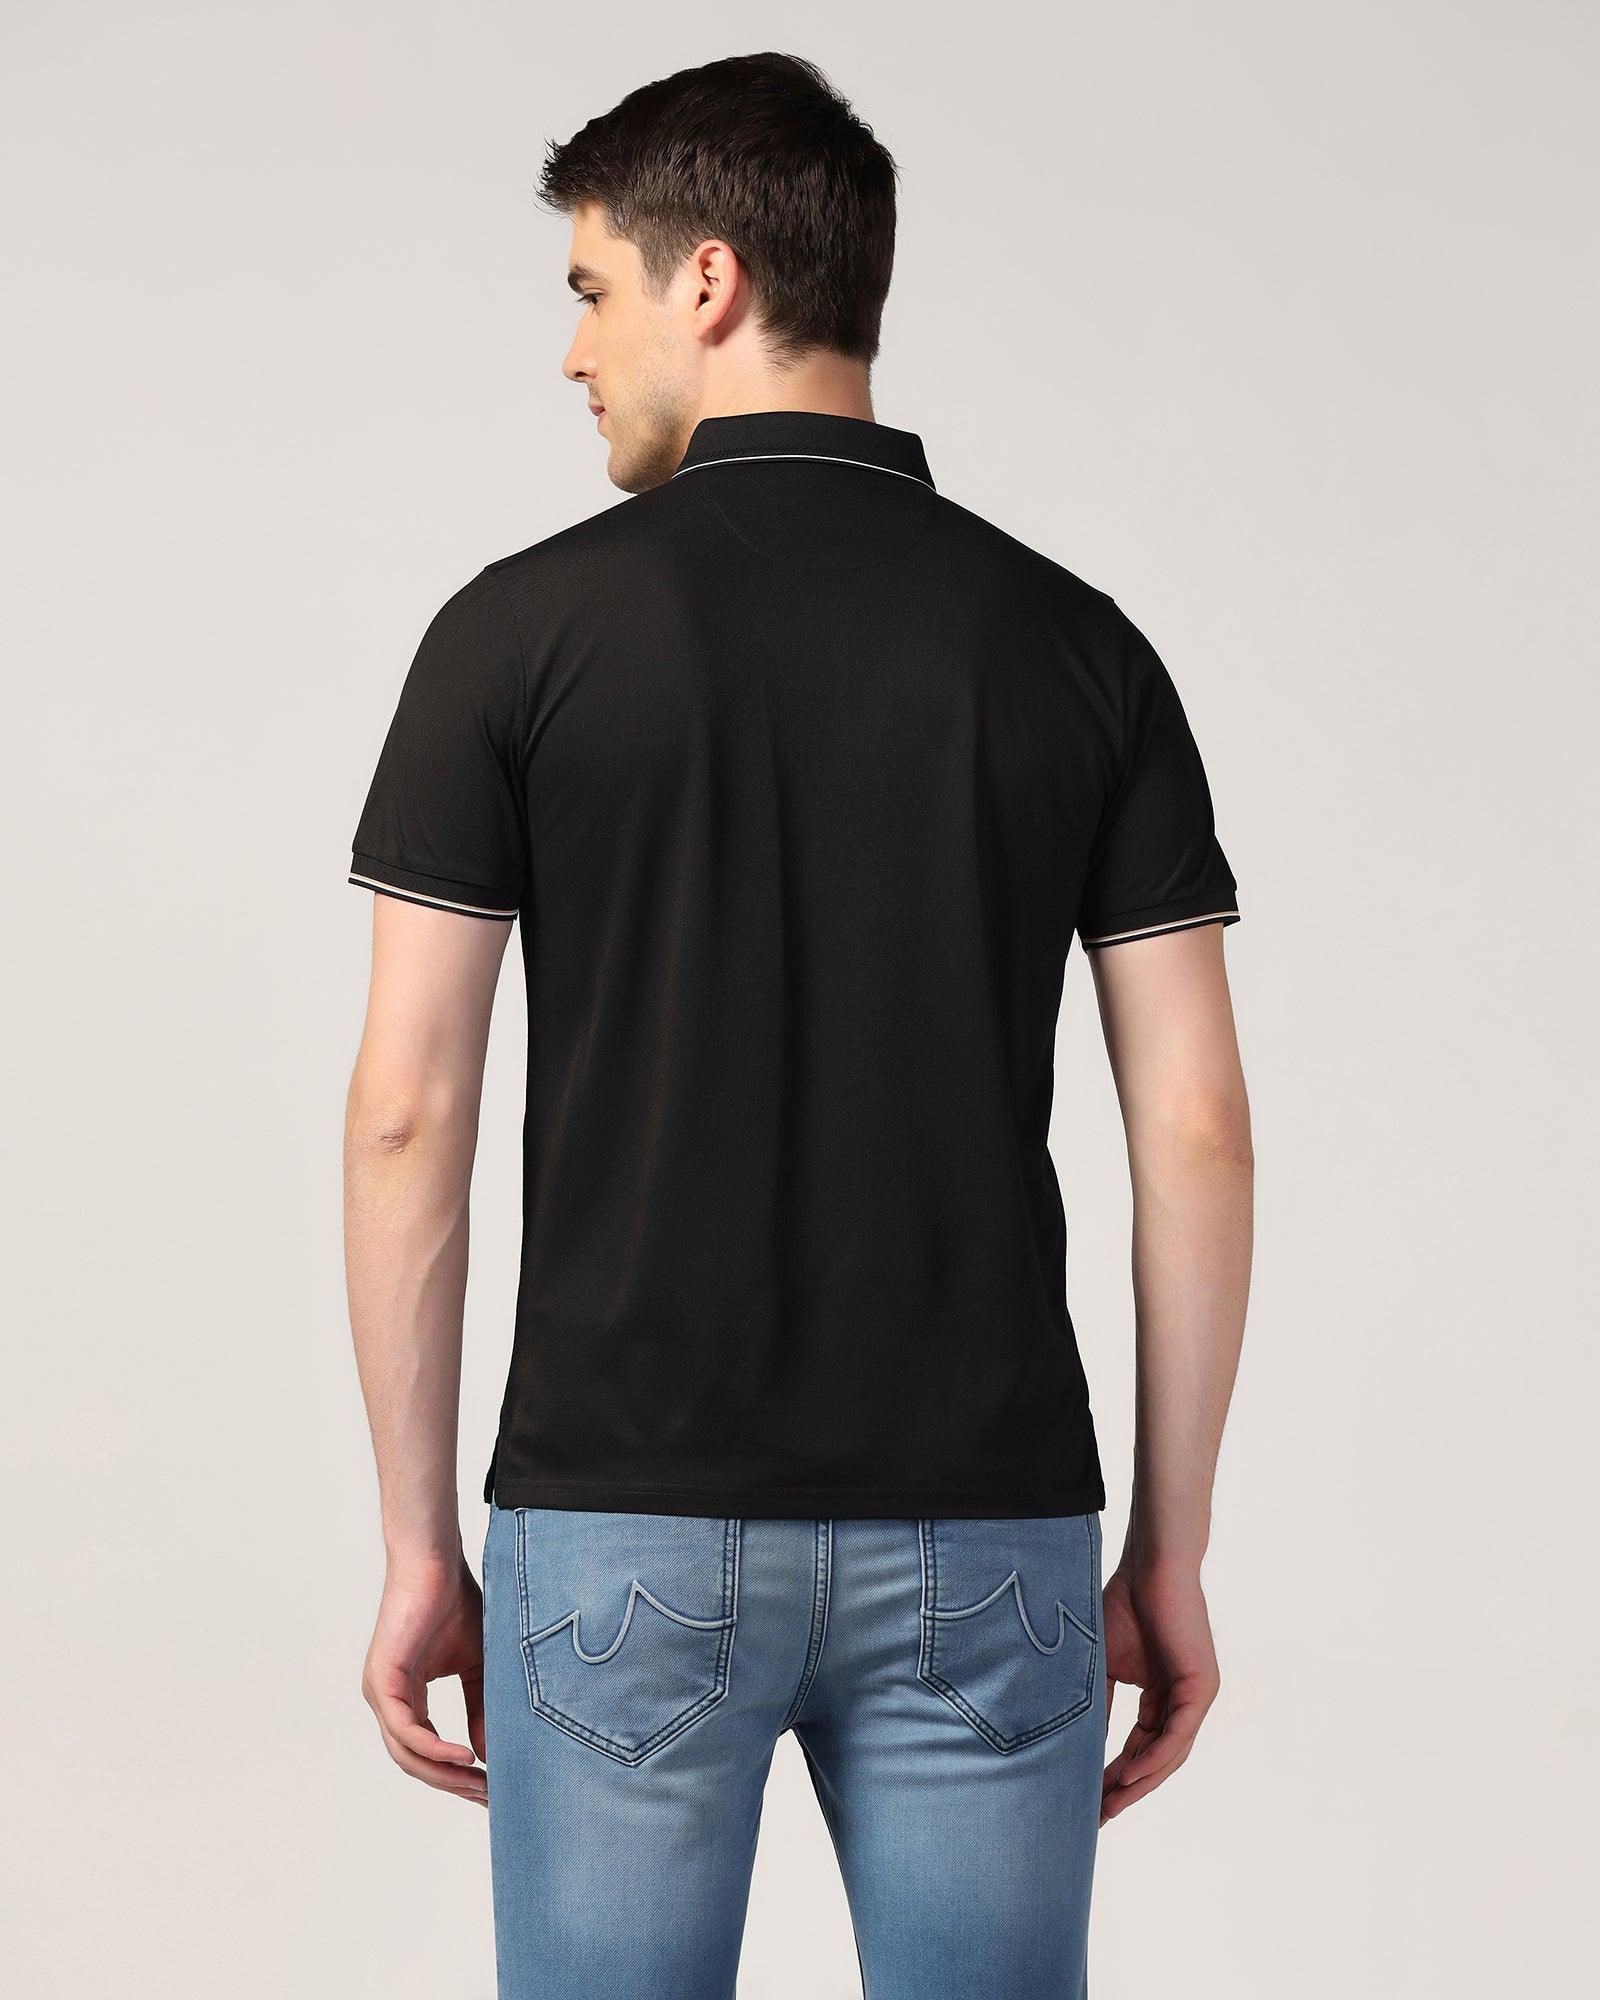 Polo Black Solid T-Shirt - Emerald